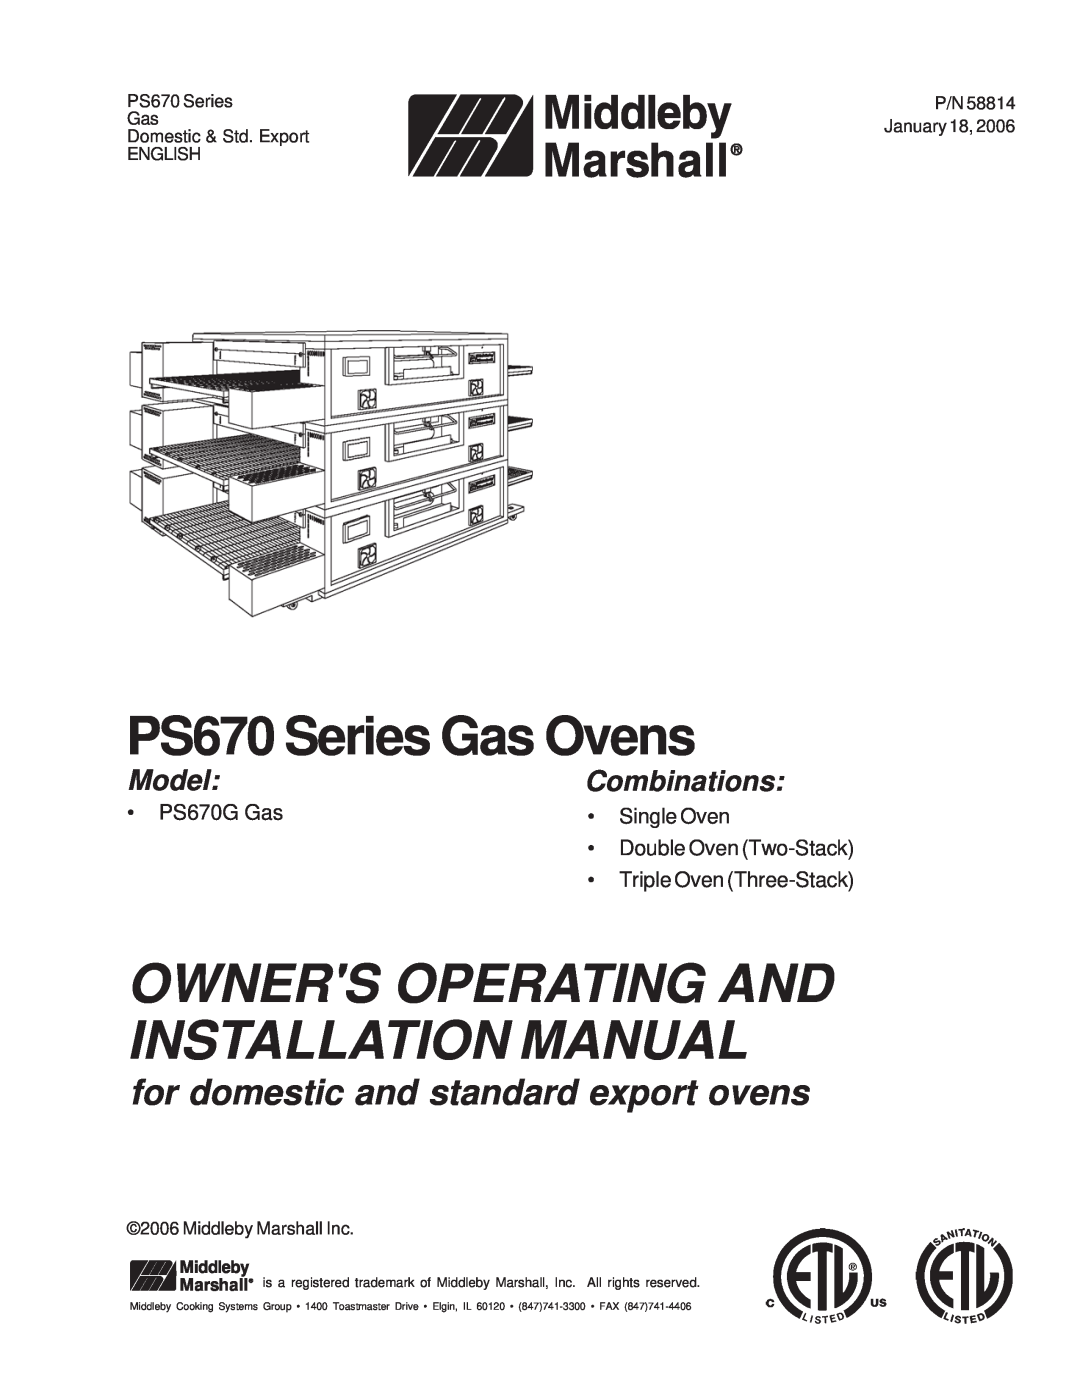 Middleby Marshall installation manual PS670 Series Gas Ovens, Owners Operating And Installation Manual, Model 